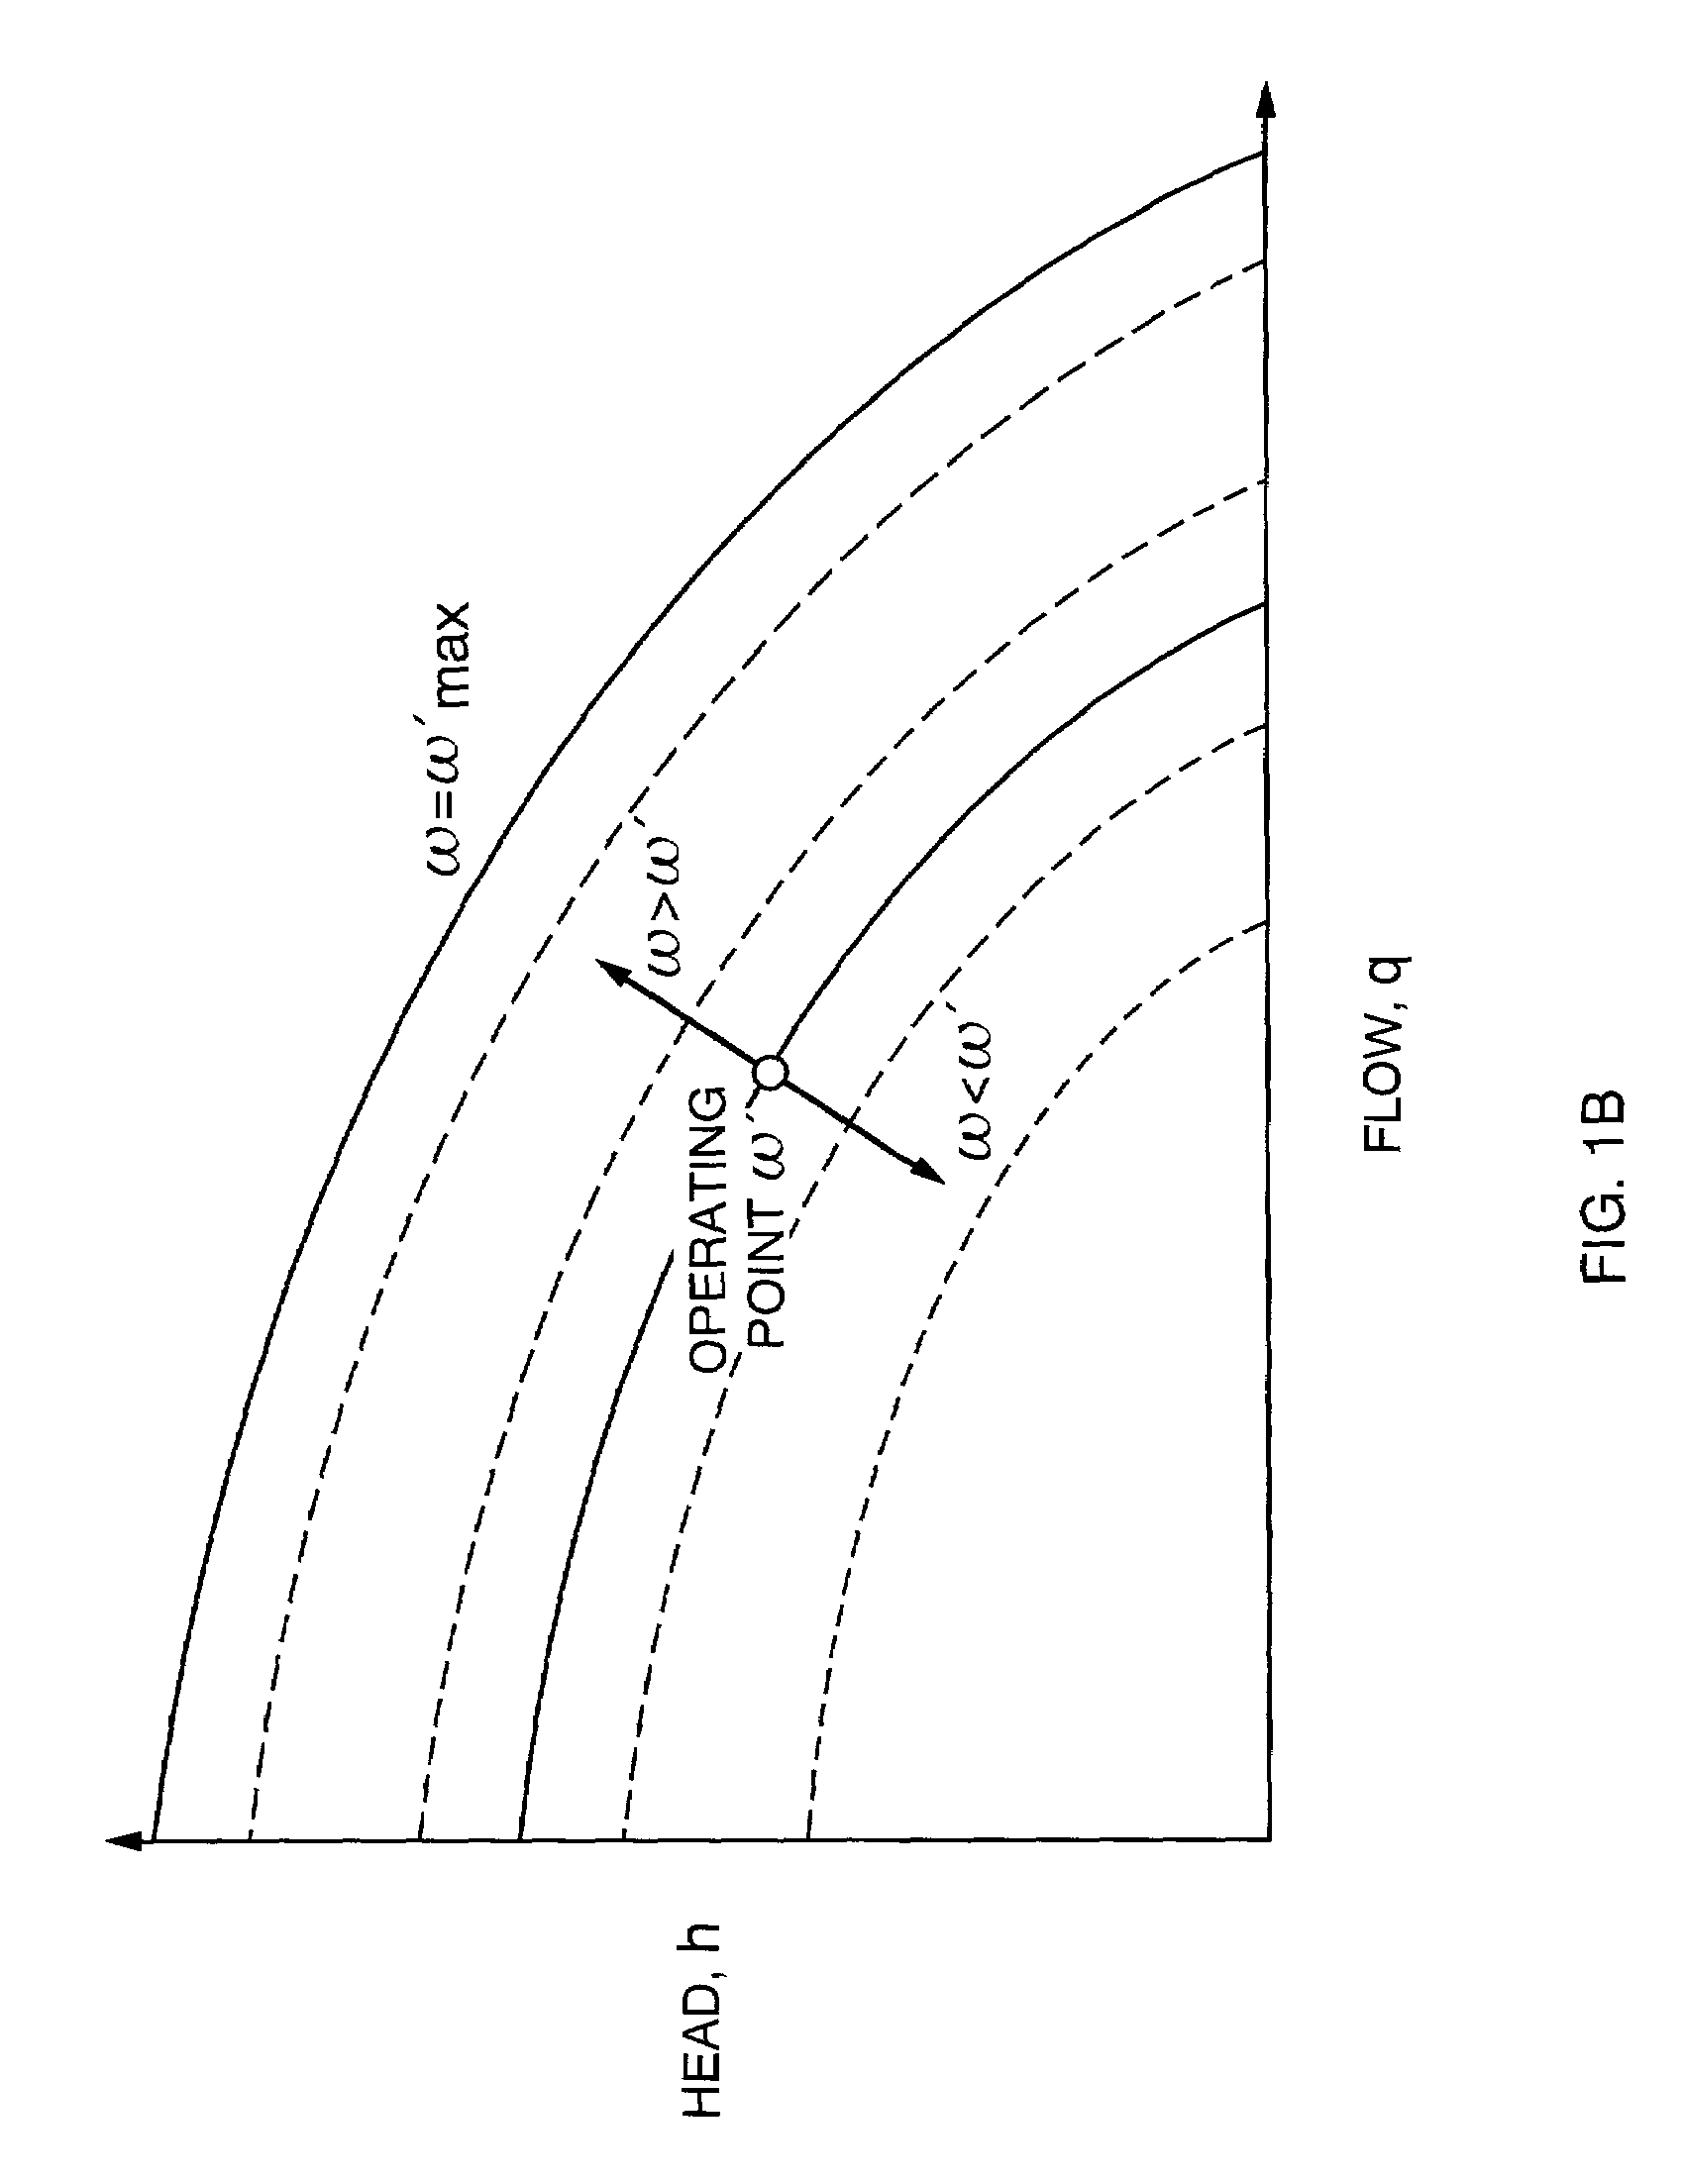 Automatic parameter estimation extension for variable speed pumps